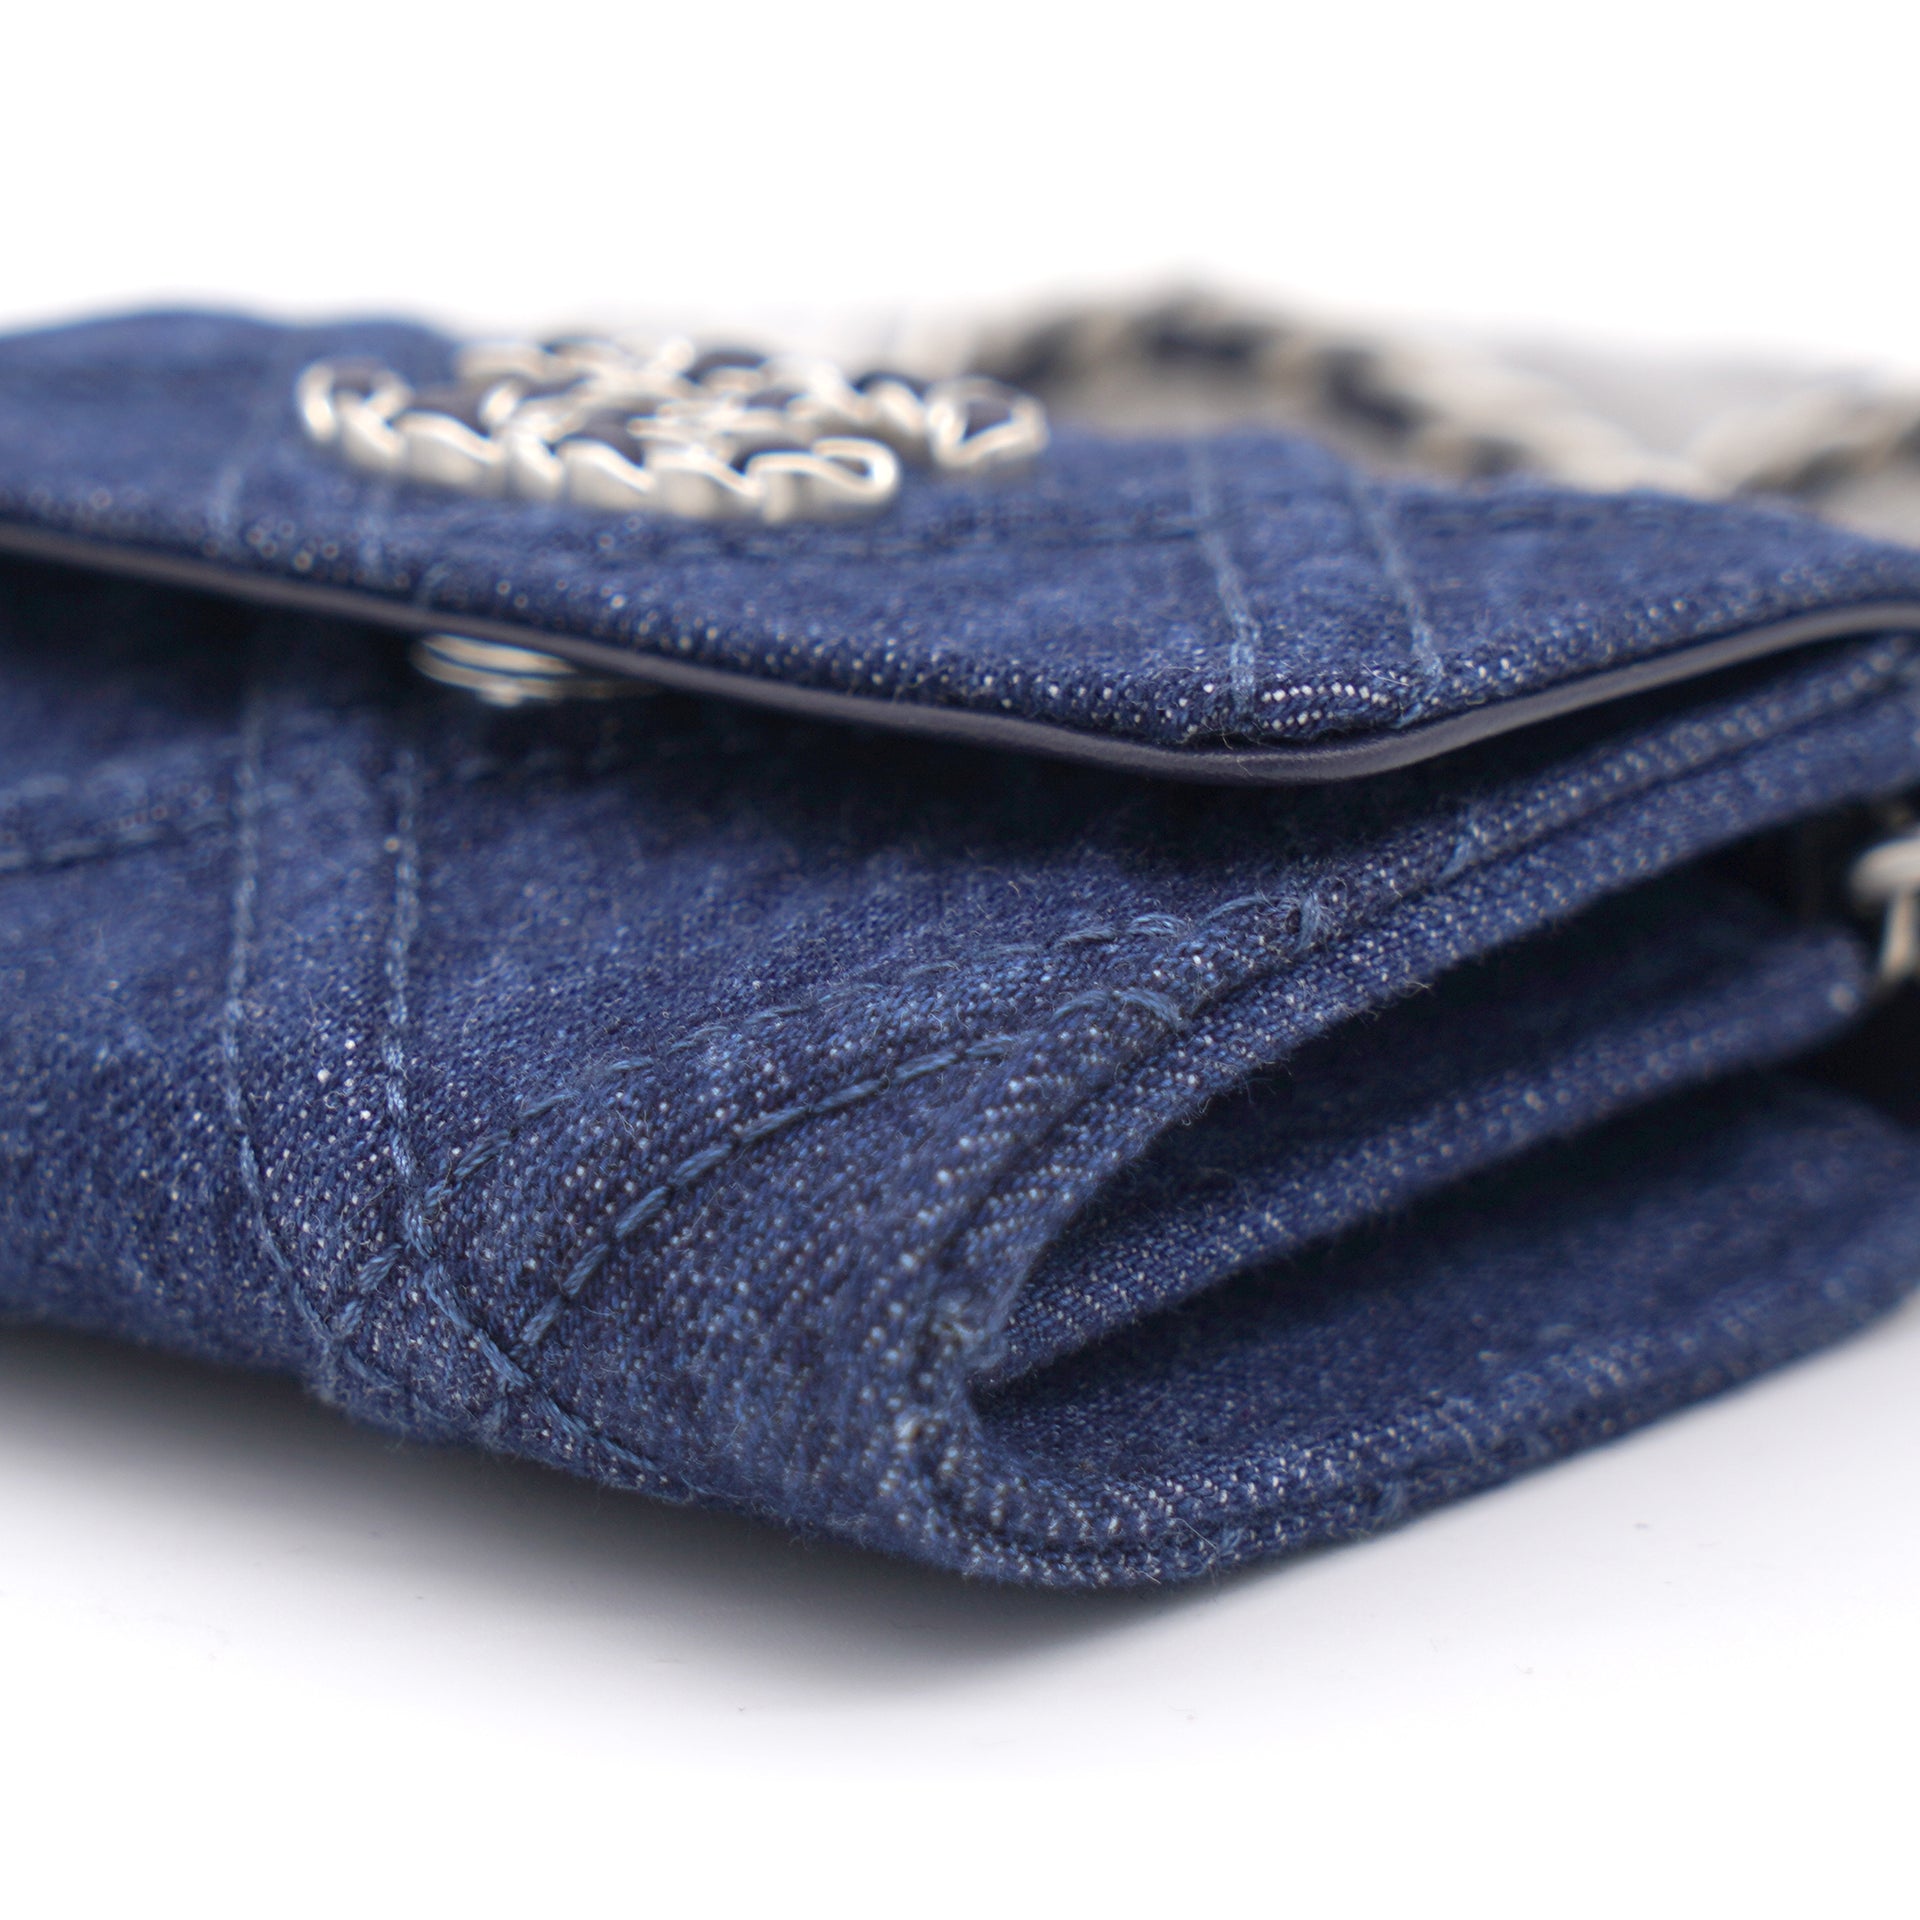 Quilted Blue Denim 19 Card Holder with Chain